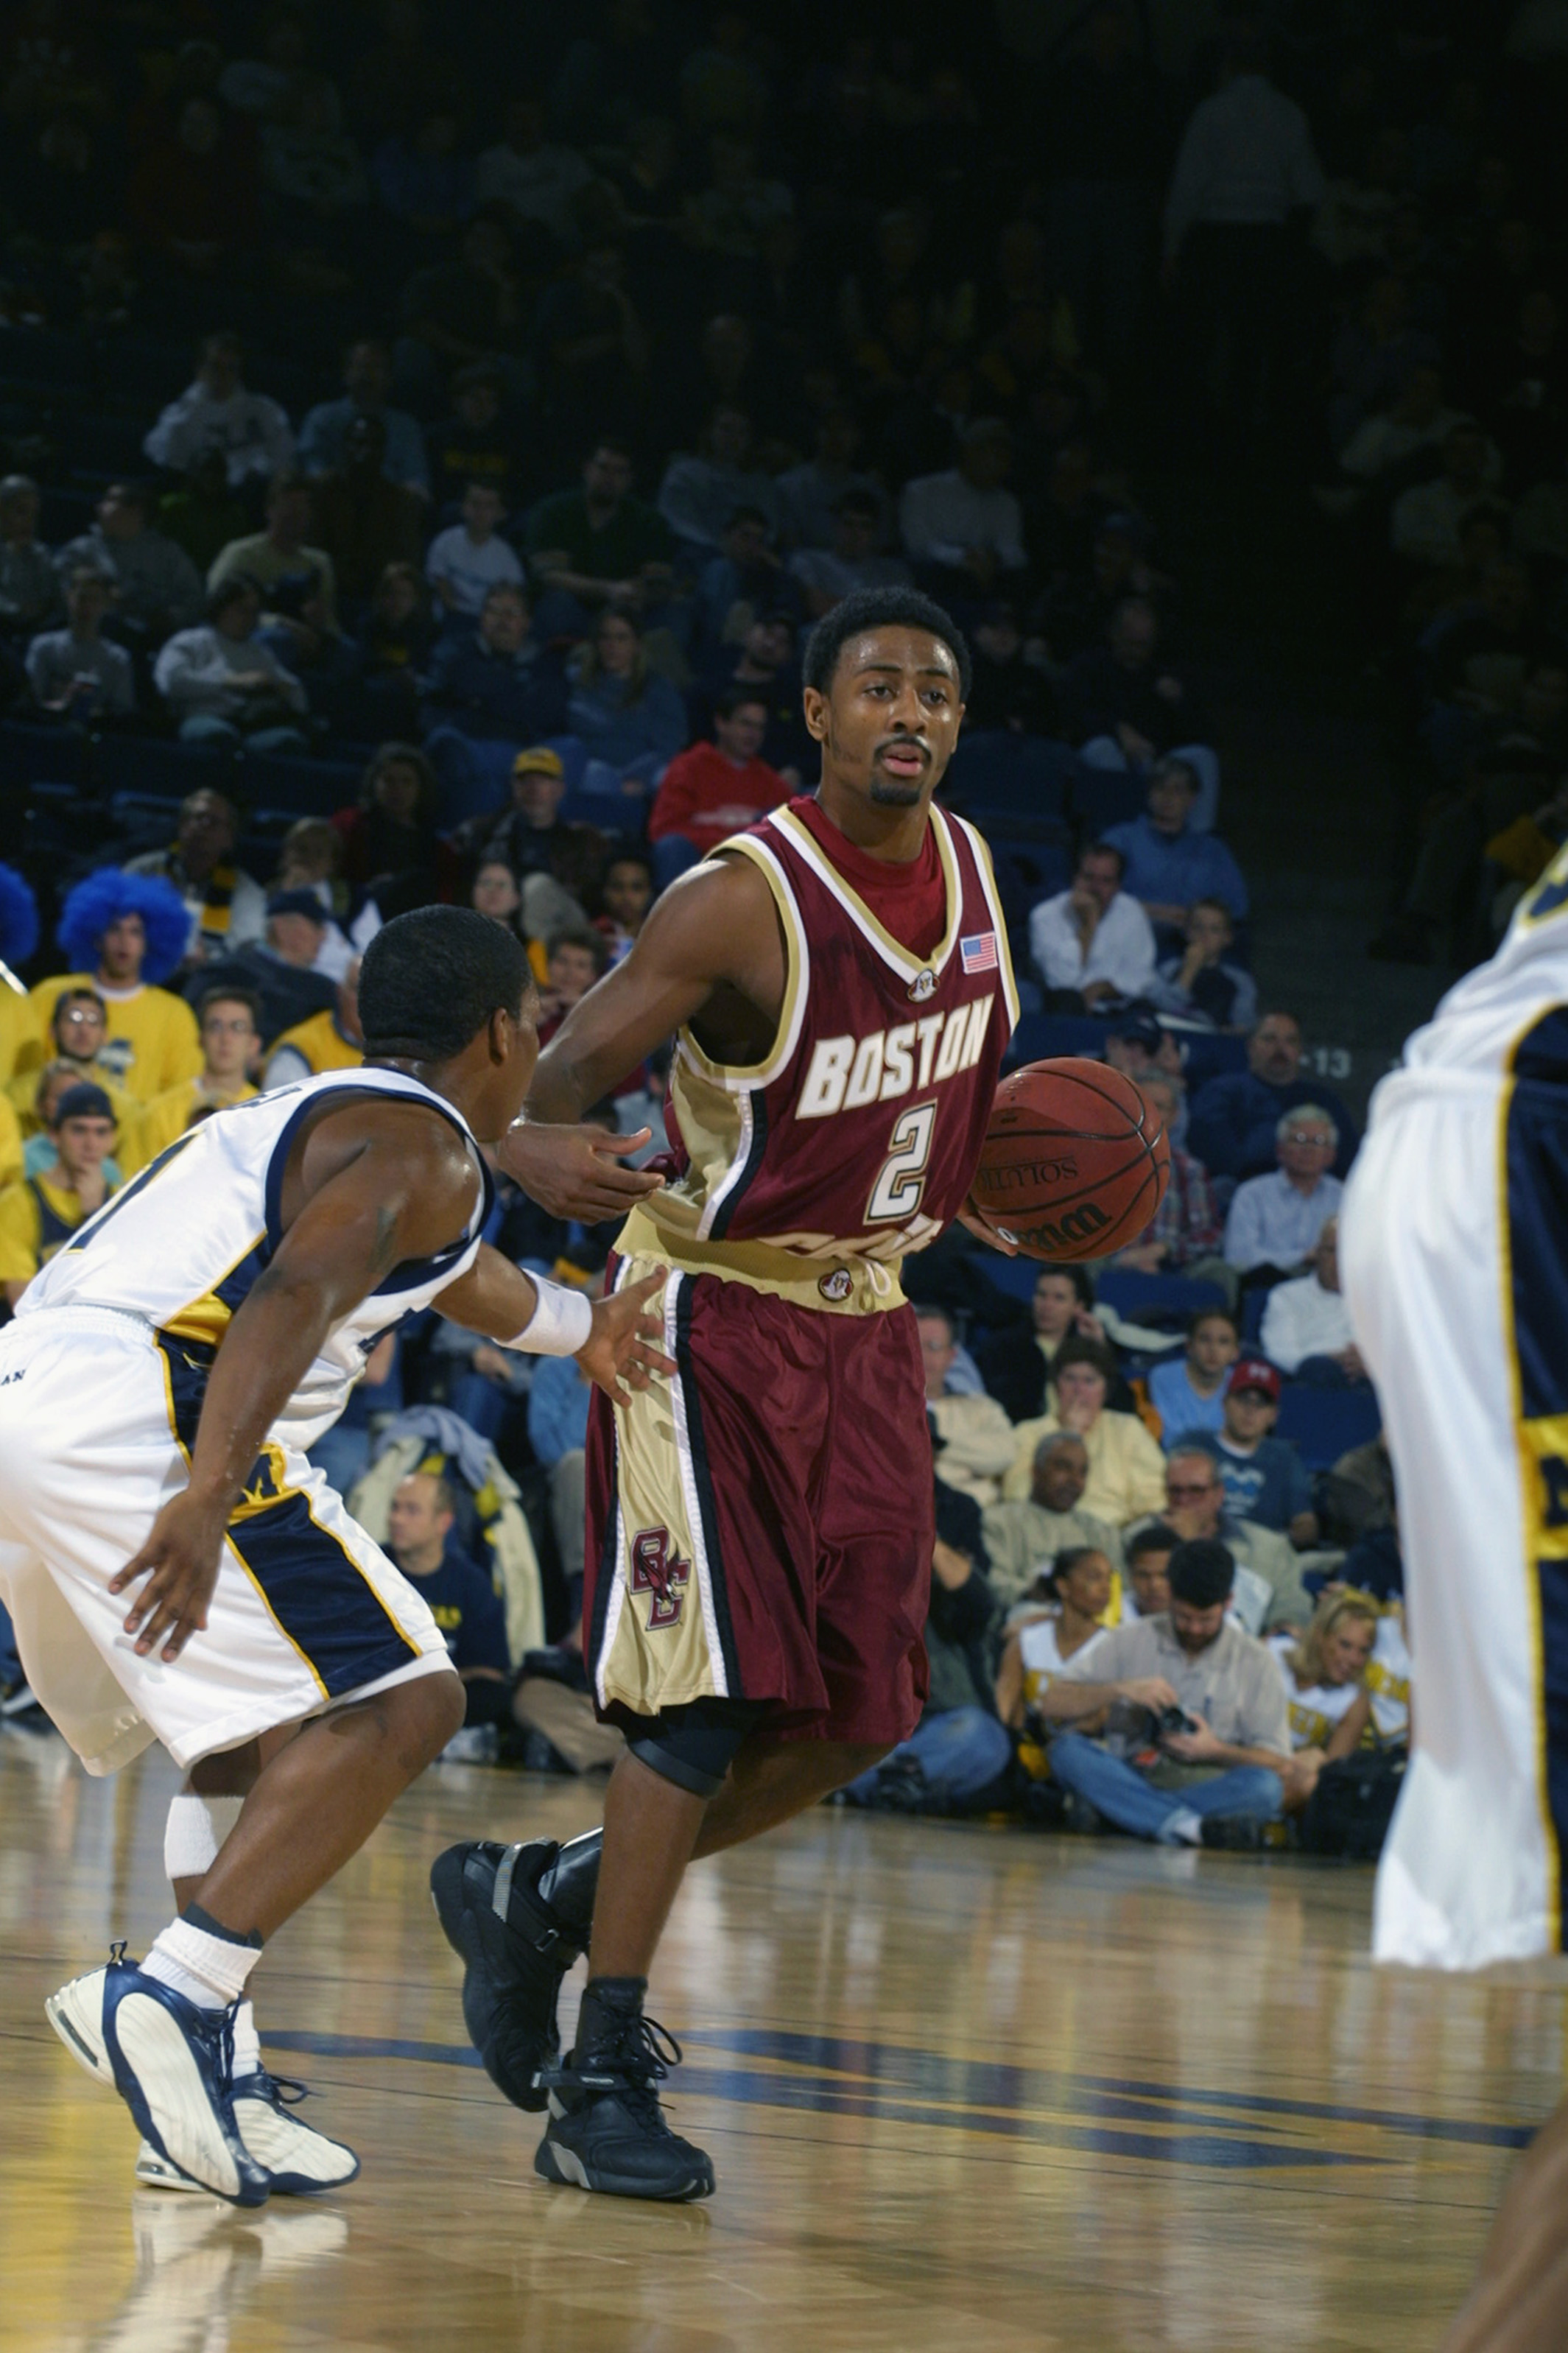 ANN ARBOR, MI - DECEMBER 1:  Guard Troy Bell #2 of the Boston College Eagles dribbles the ball against guard Avery Queen #1 of the Michigan Wolverines during the game at Crisler Arena in Ann Arbor, Michigan on December 1, 2001.  Boston College defeated Mi